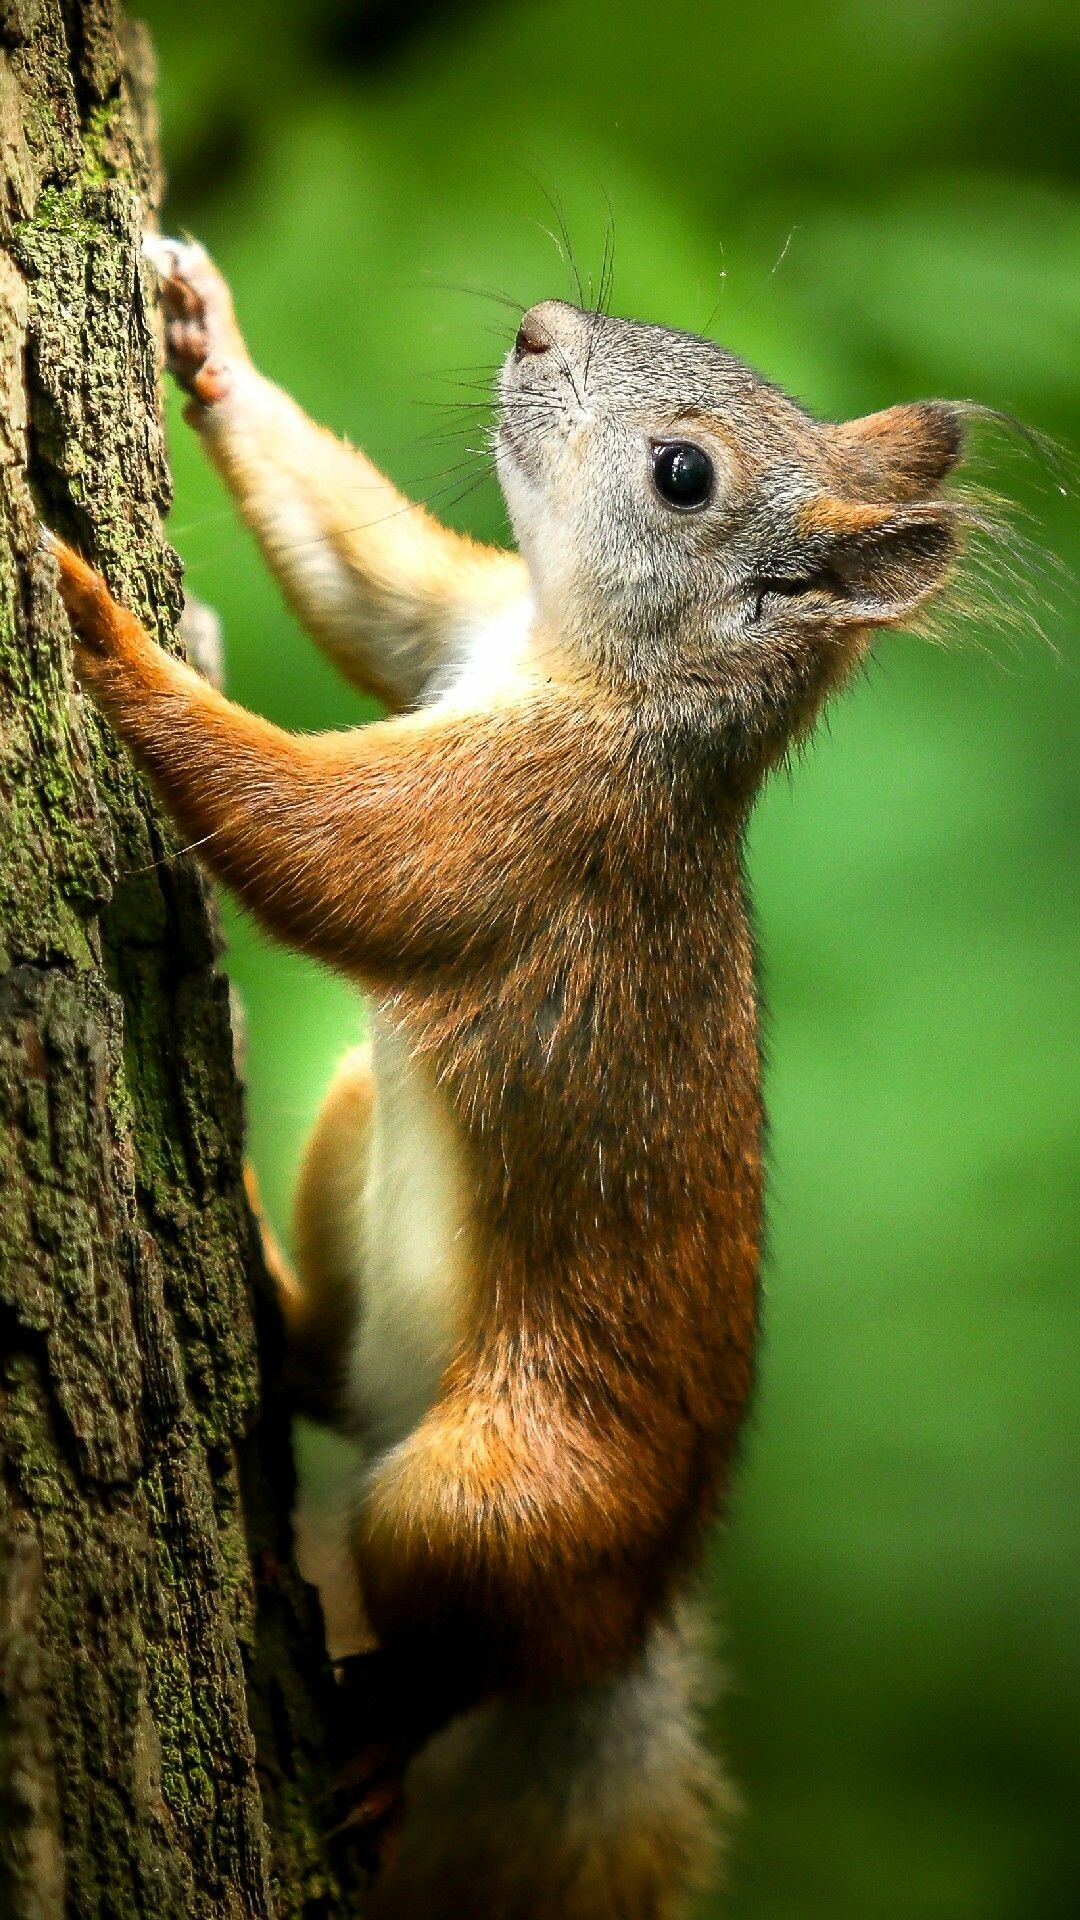 Squirrel: A small animal covered in fur with a long tail. 1080x1920 Full HD Wallpaper.